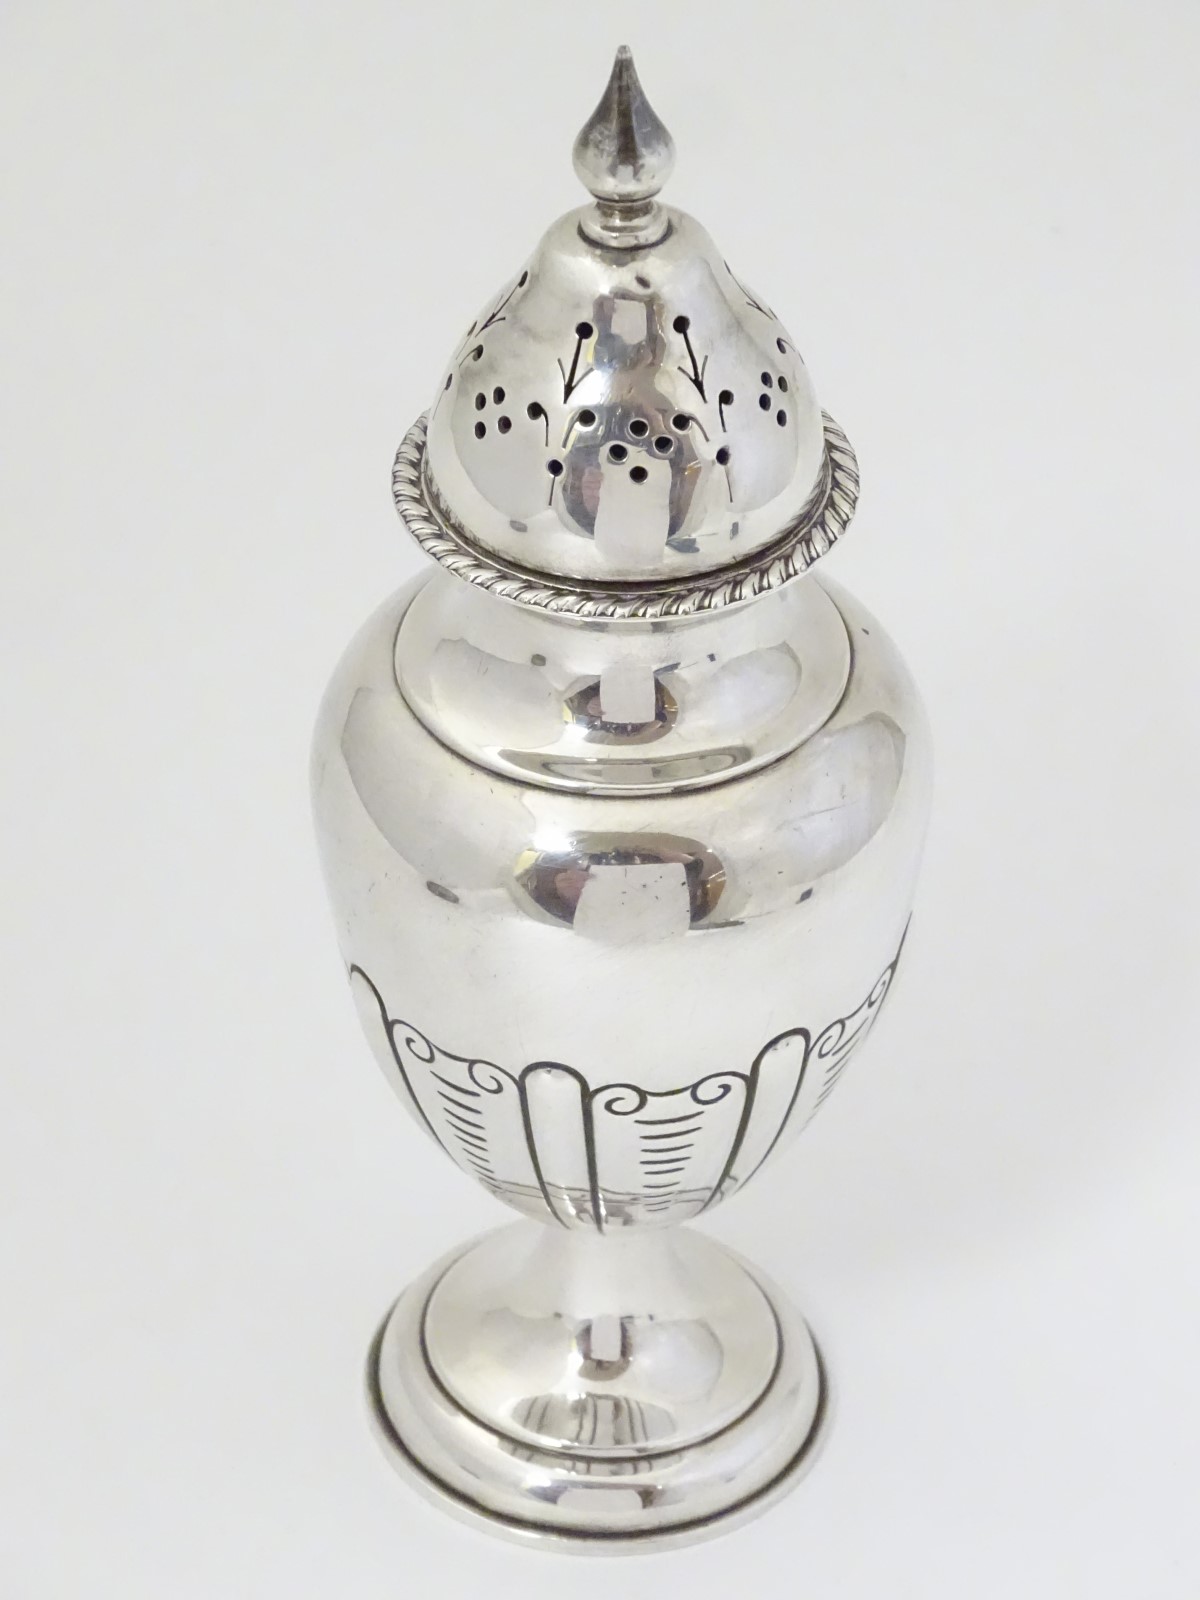 A silver plated sugar caster / sifter 8" long CONDITION: Please Note - we do not